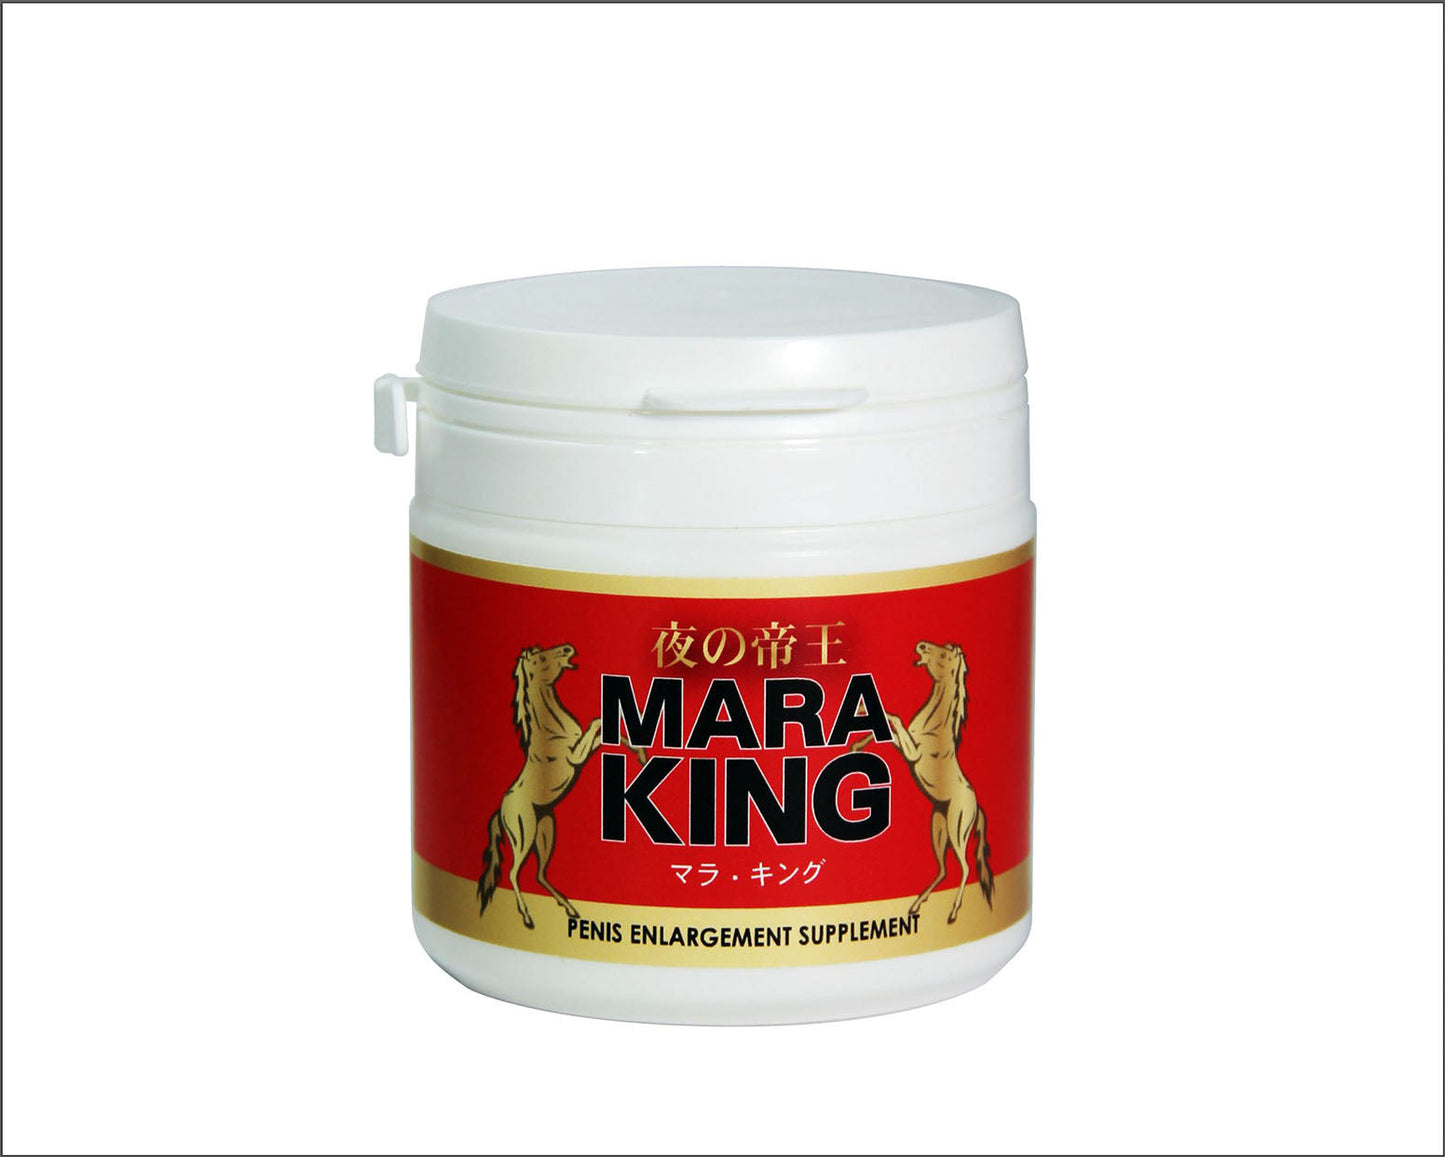 A must for men who want to make women say hiihii more! [Emperor of the Night MARA-KING]